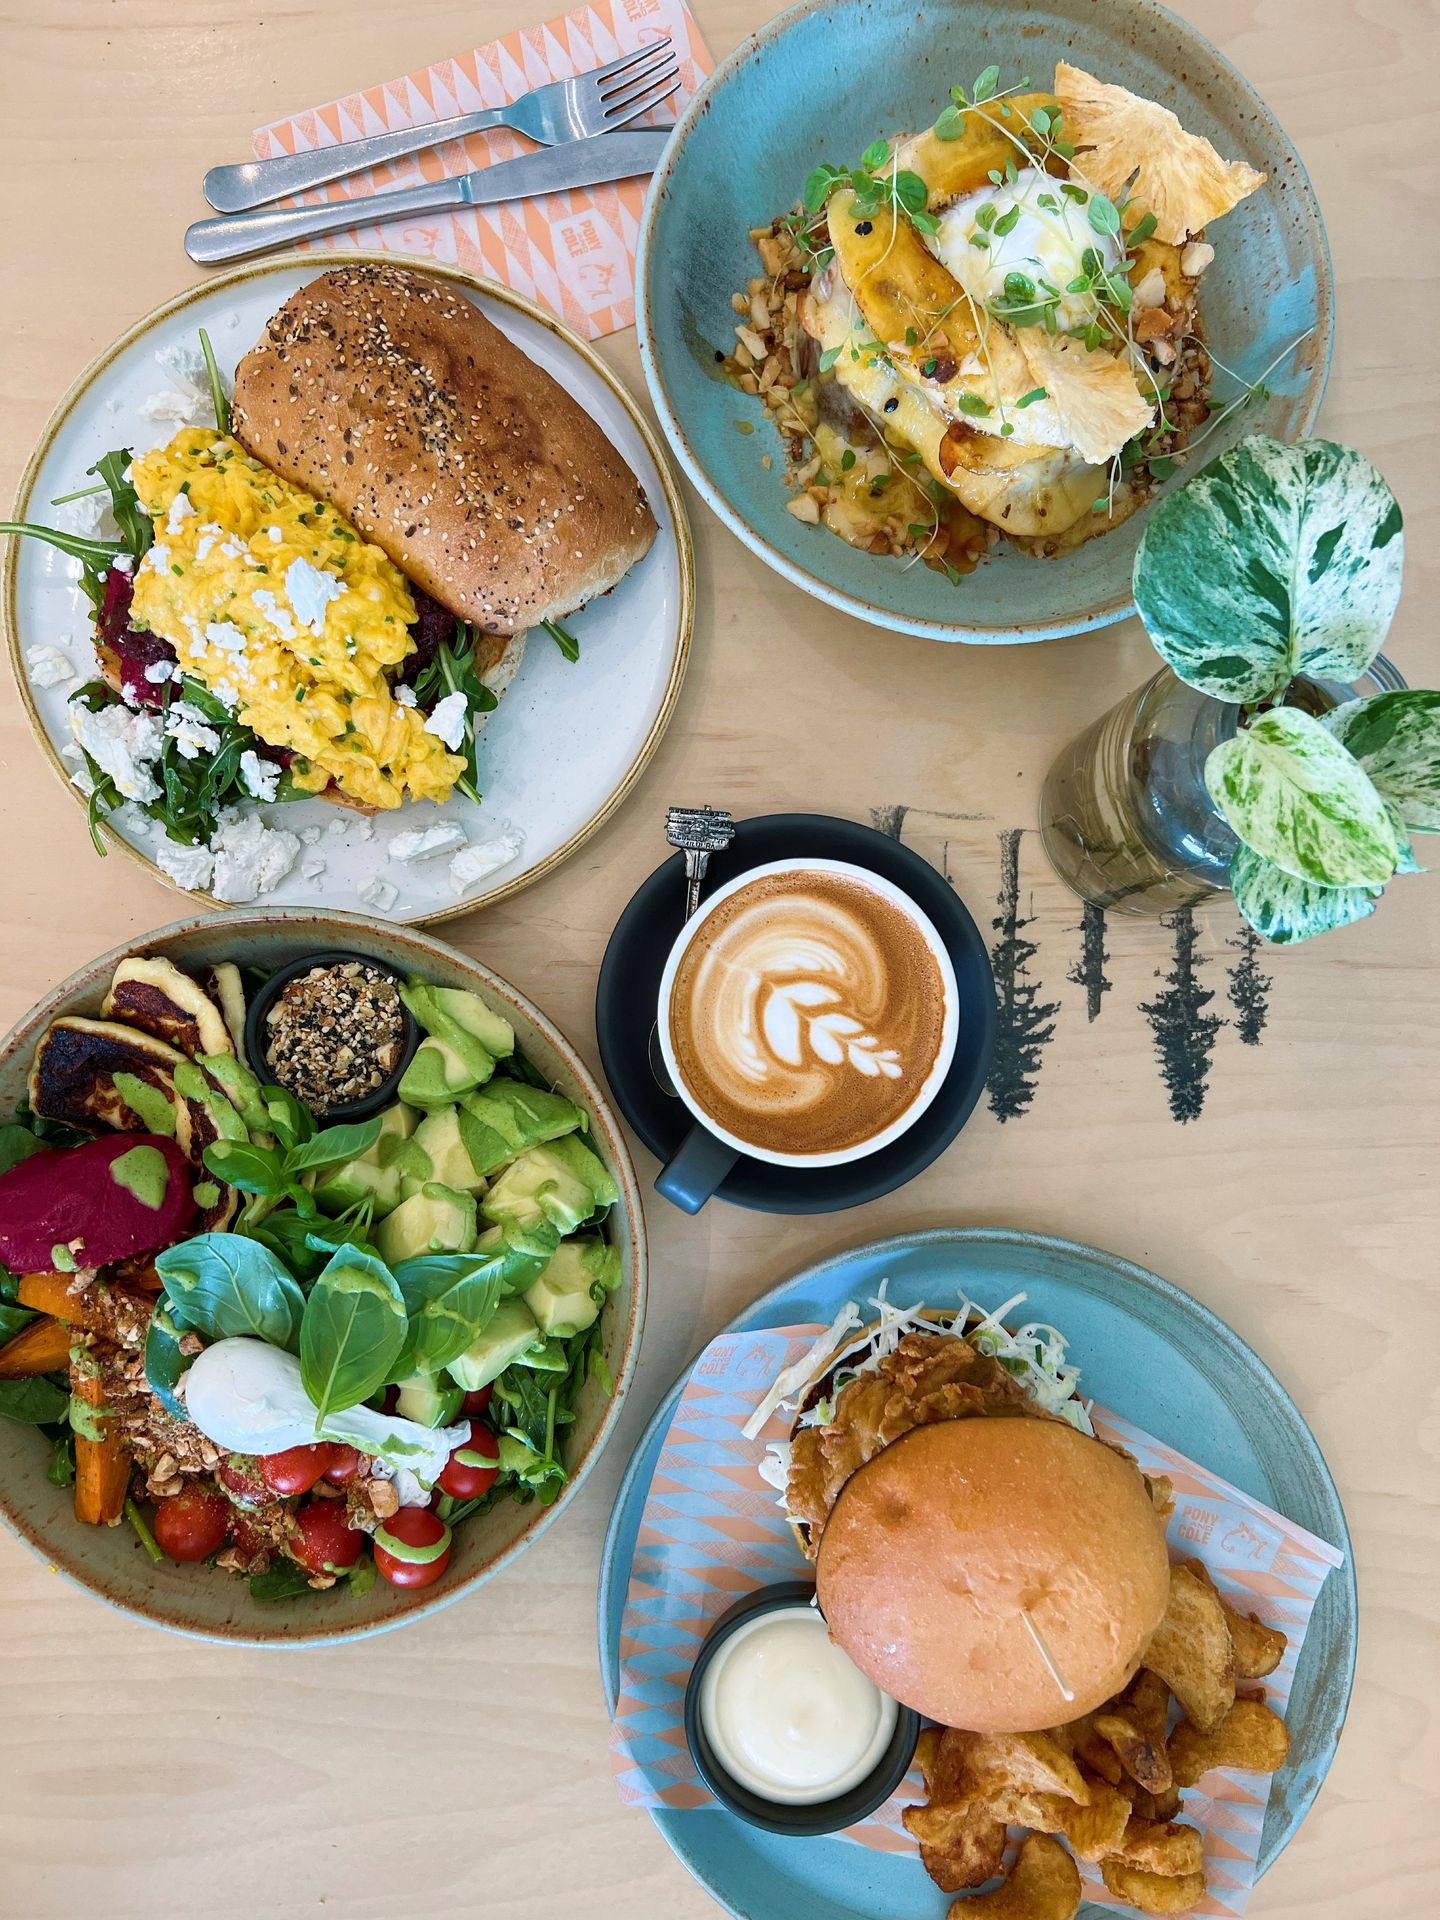 WIN Brunch for Six People at Pony and Cole!